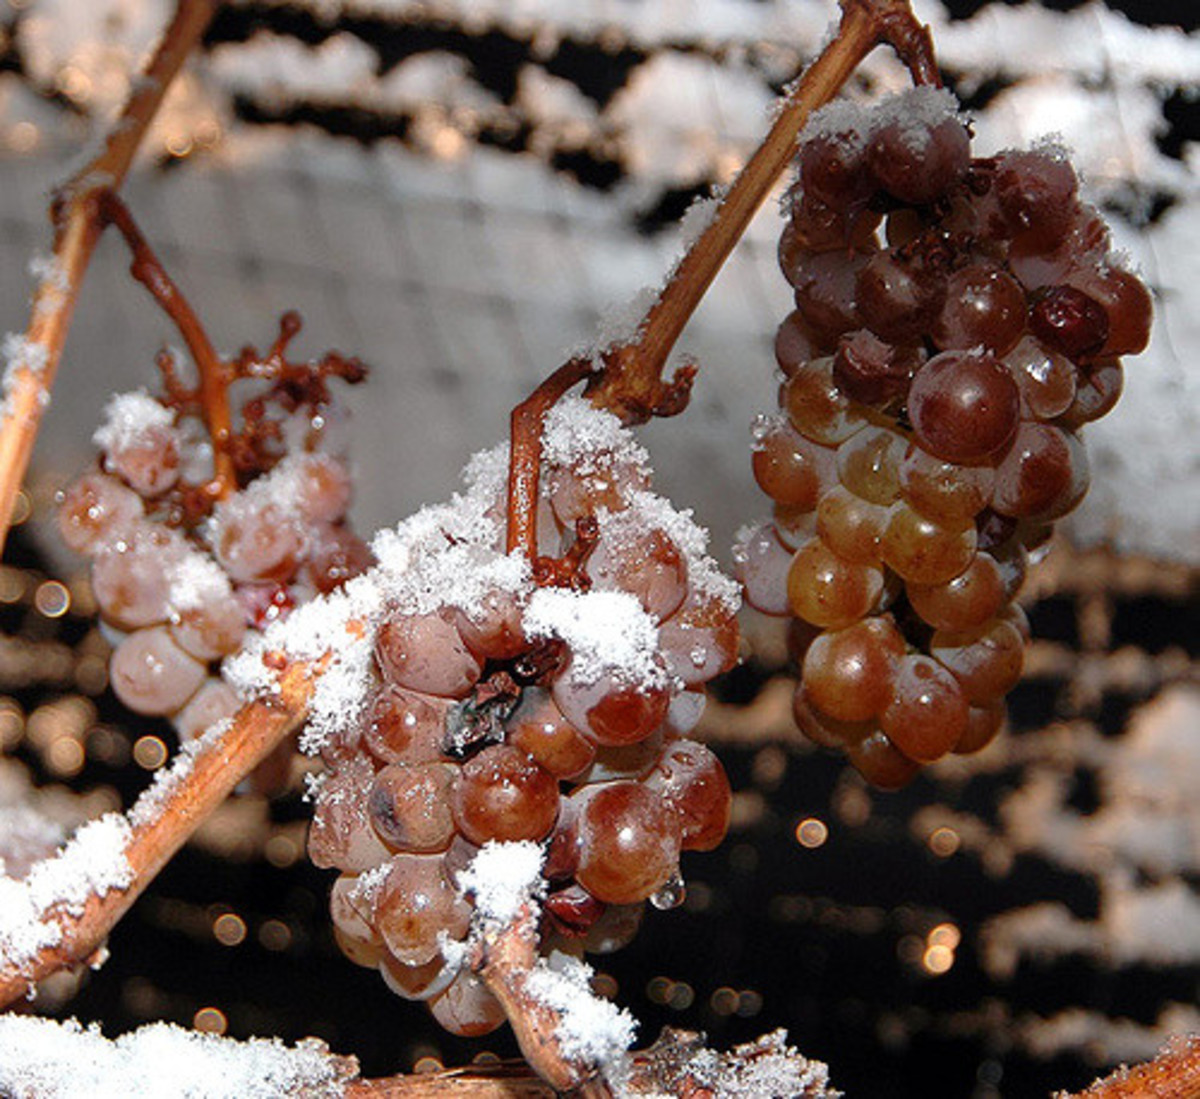 Icewine grapes gown during winter. At least 75% of all of Canada's icewine is produced in Ontario.